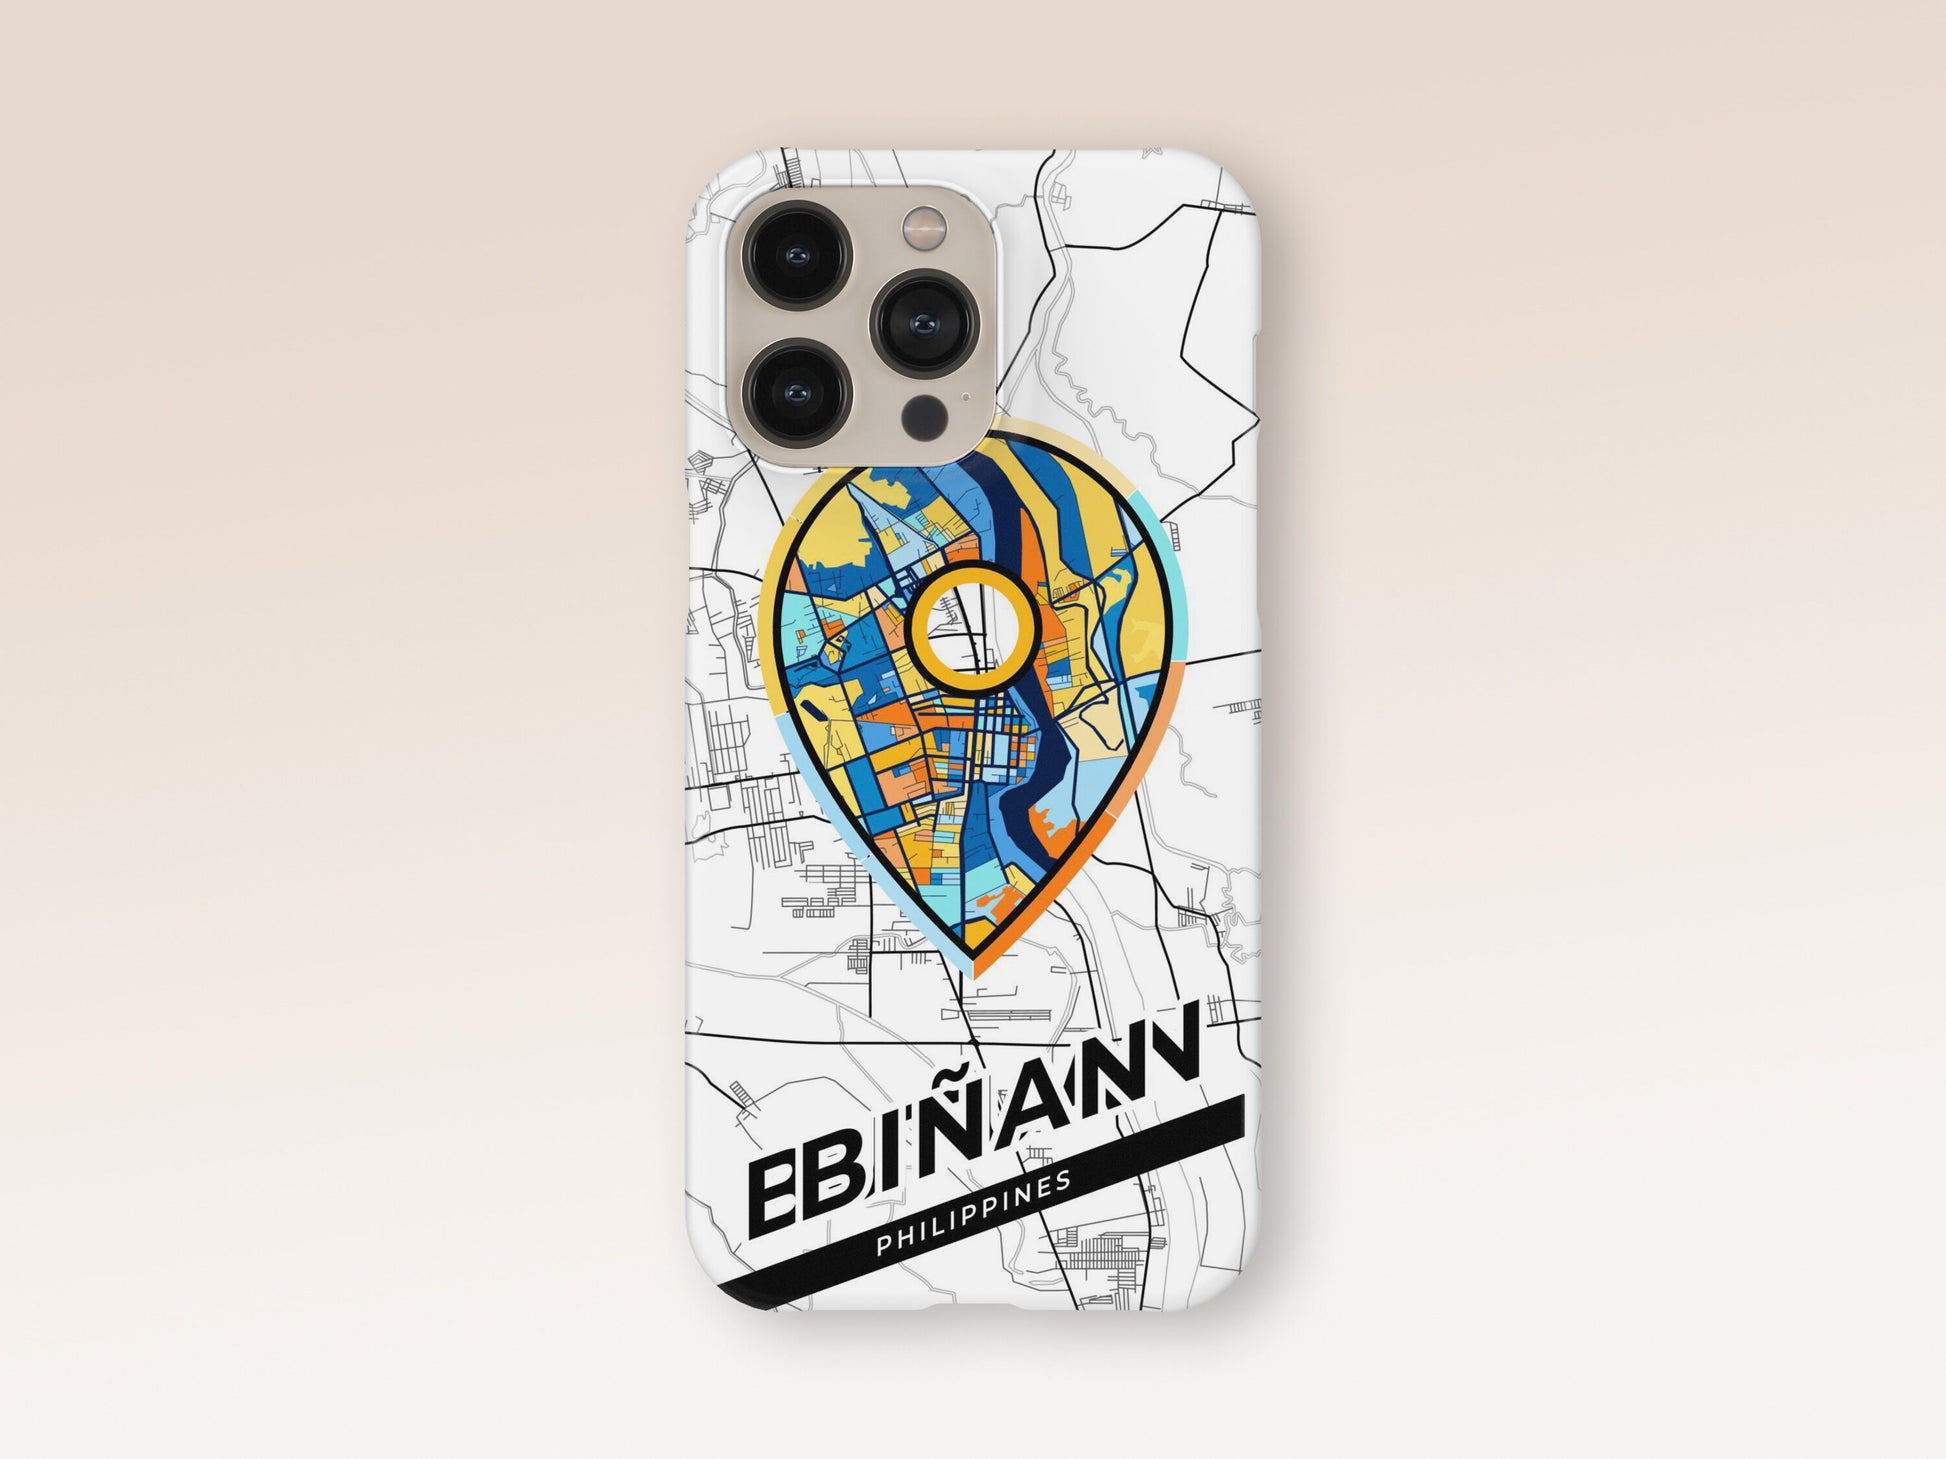 Biñan Philippines slim phone case with colorful icon. Birthday, wedding or housewarming gift. Couple match cases. 1